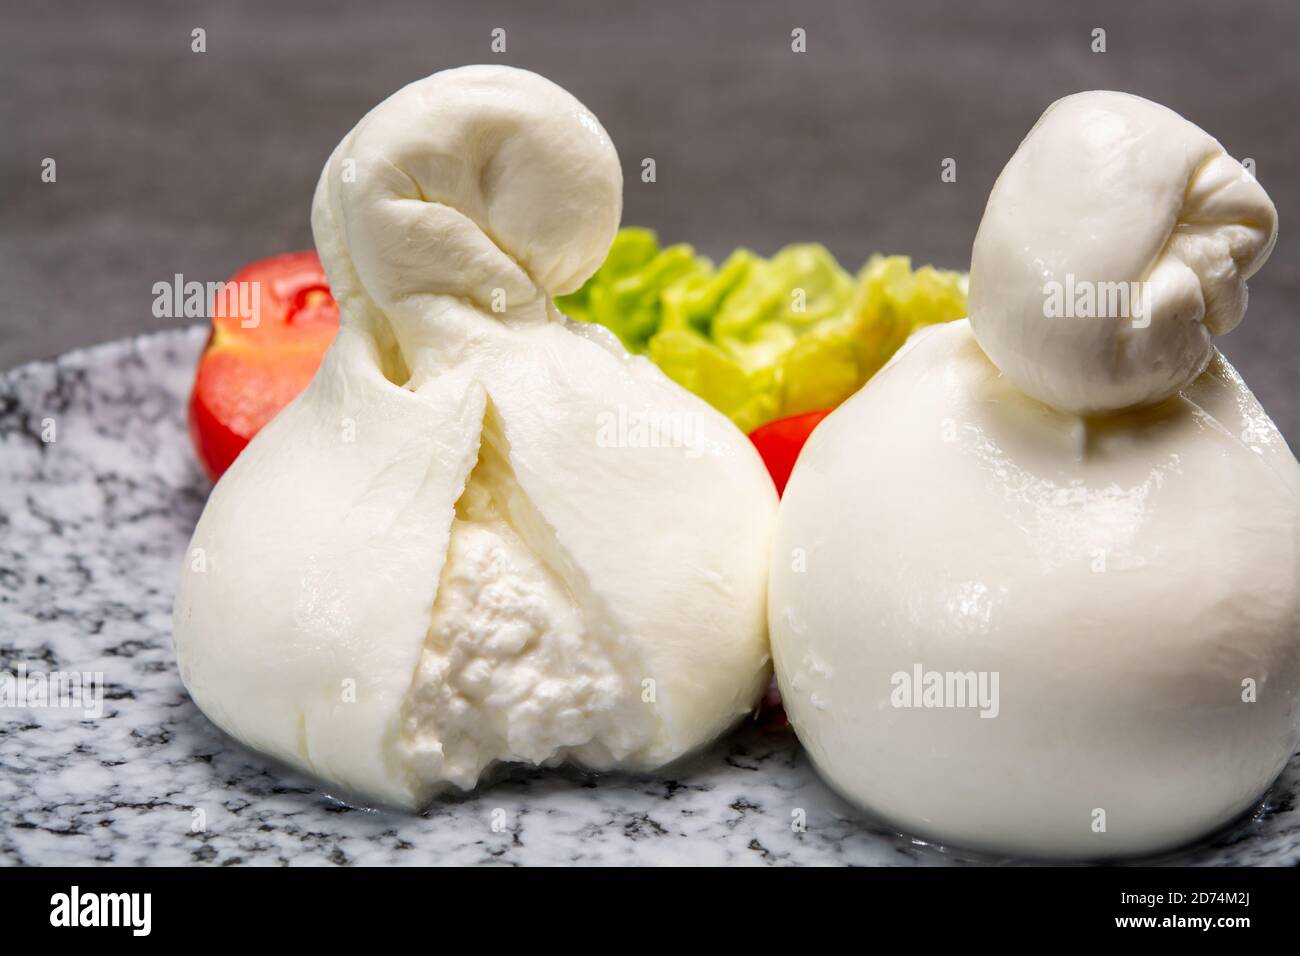 Cheese collection, italian soft up made balls cream Photo mozzarella white from cheese - inside region Stock Apulia in of burrata close with Alamy